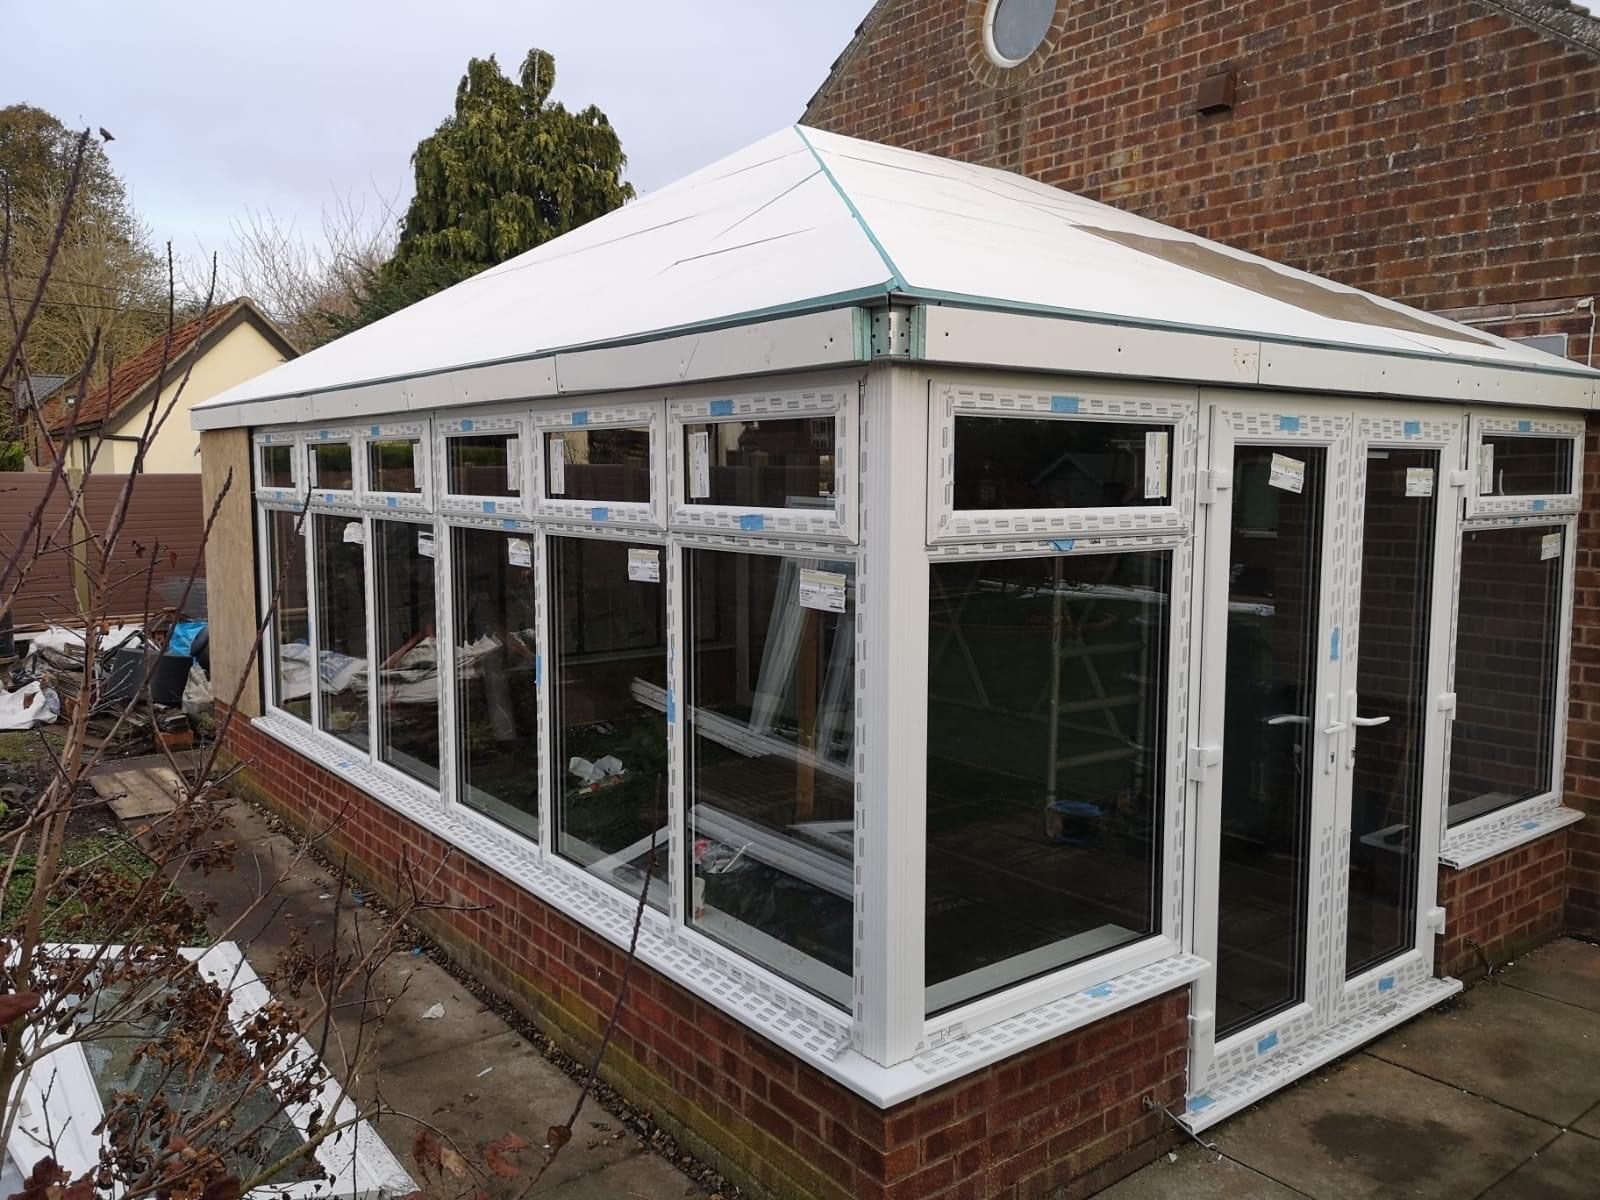 uPVC windows installed for tiled roof conservatory